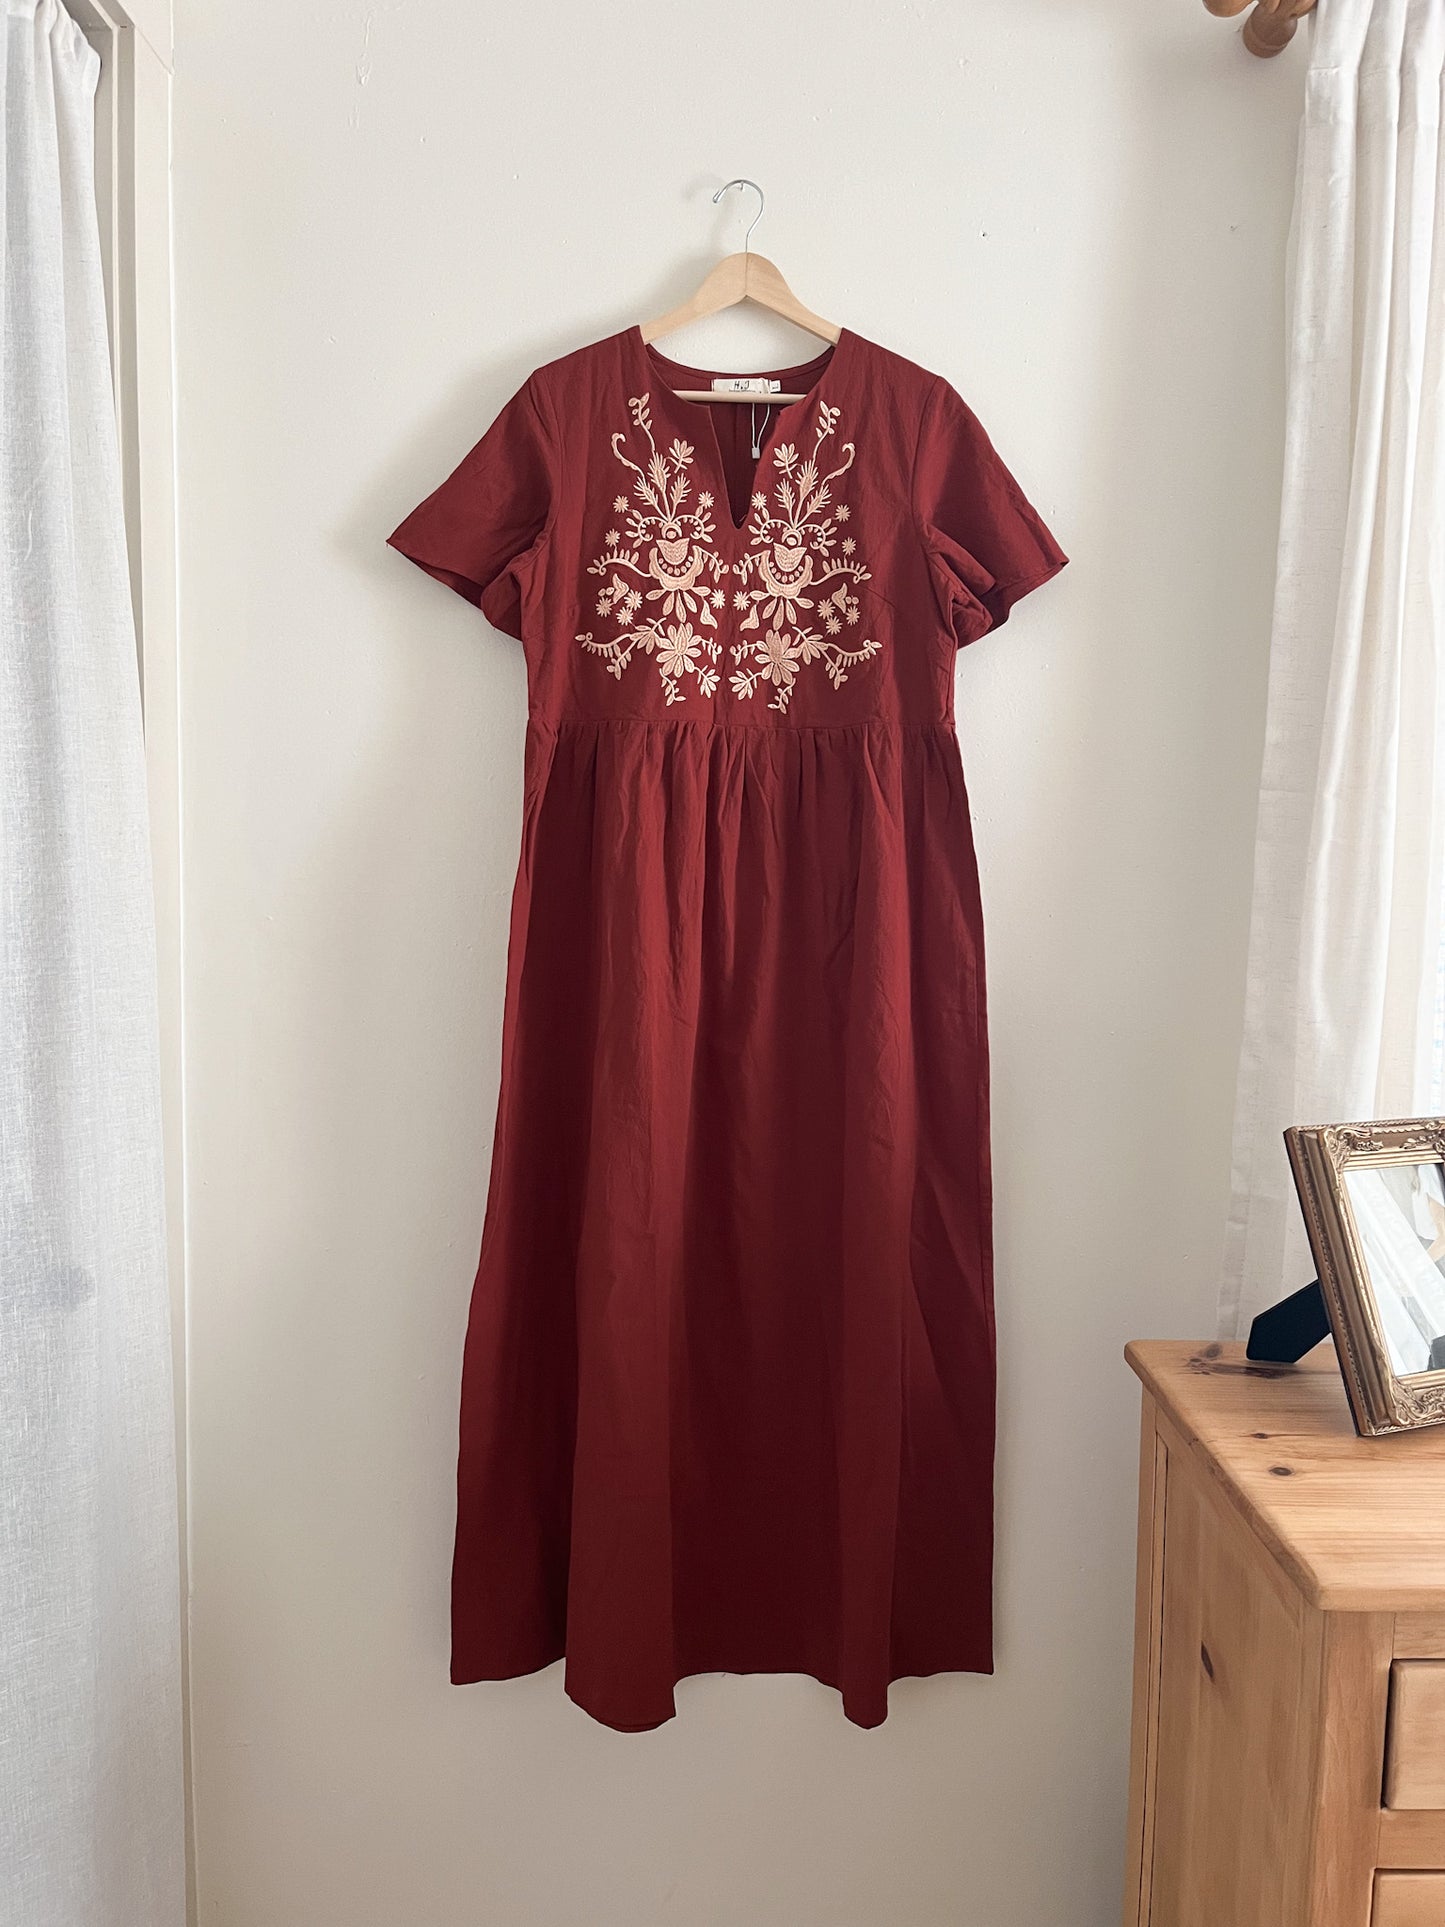 Embroidered Dress in Brick Red (L)